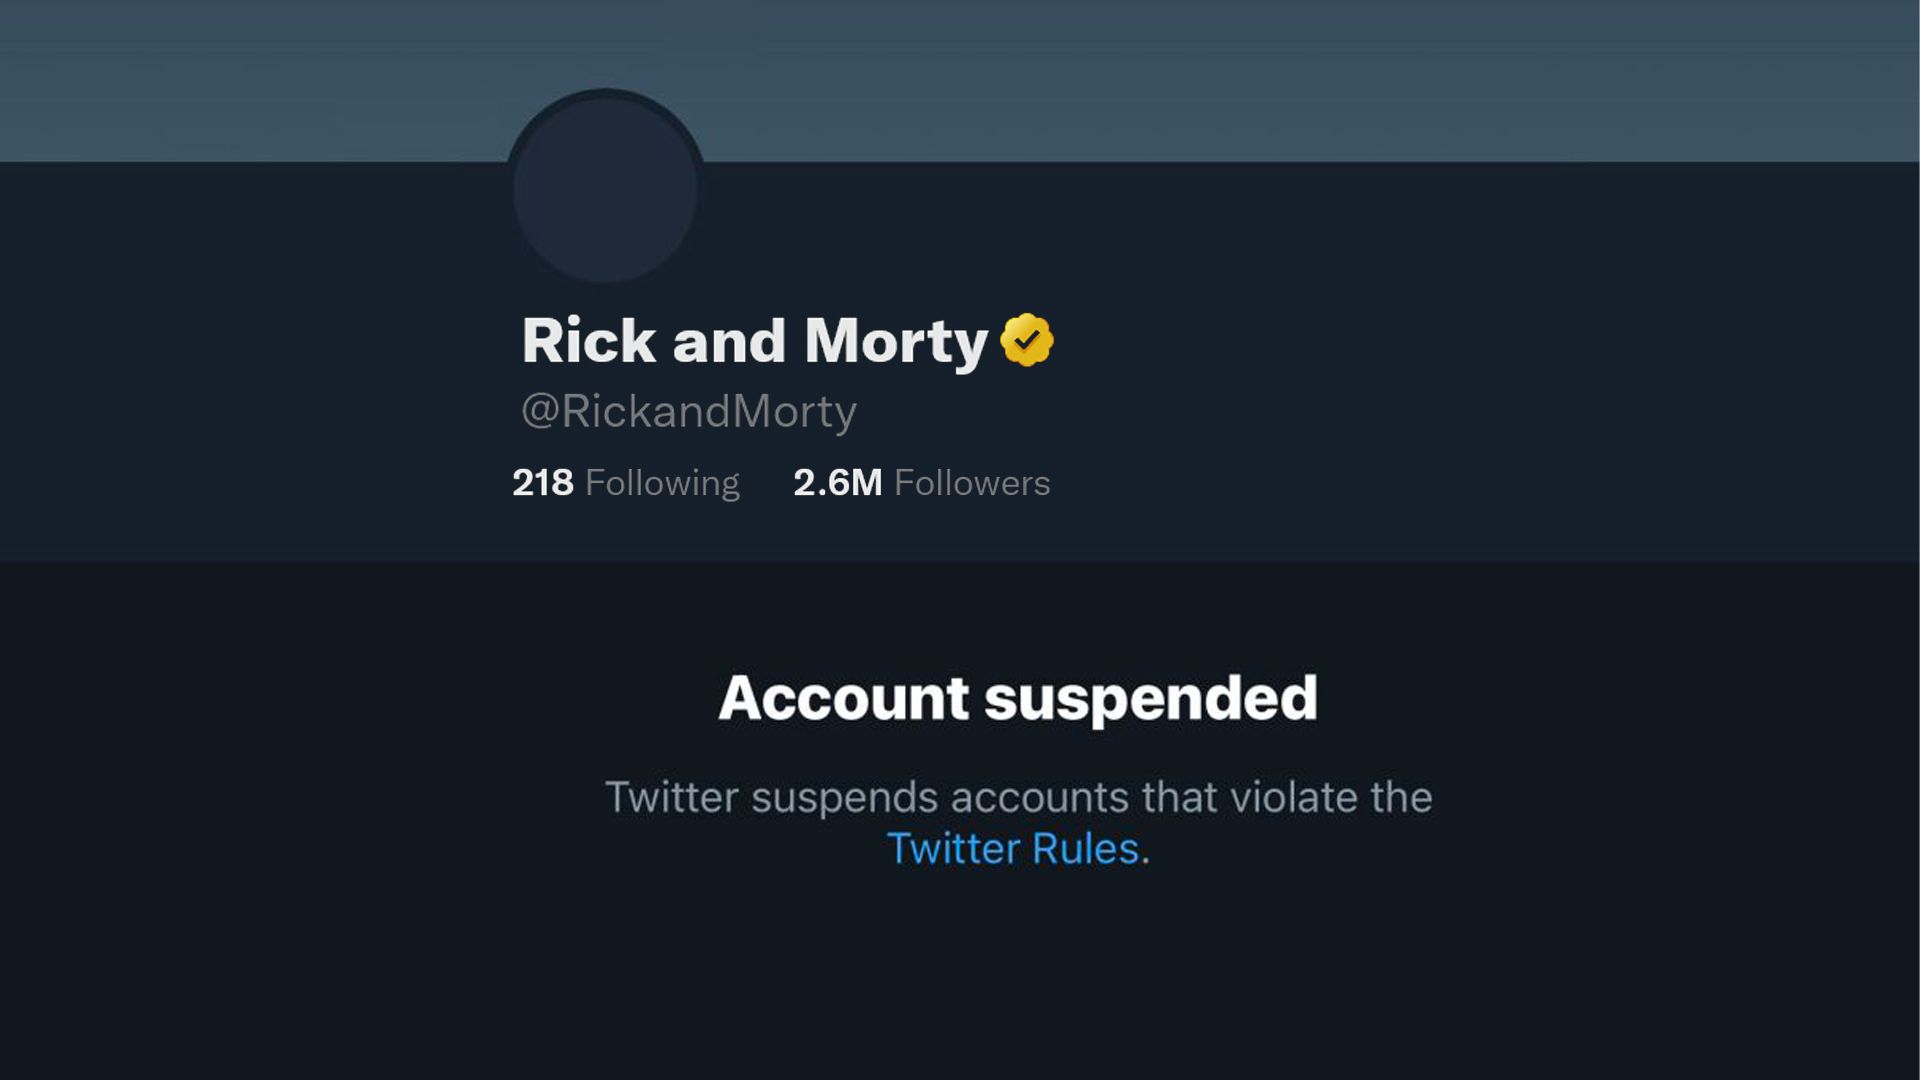 Elon Musk Vows To End "Woke Mind Virus", Bans "Rick And Morty" From Twitter